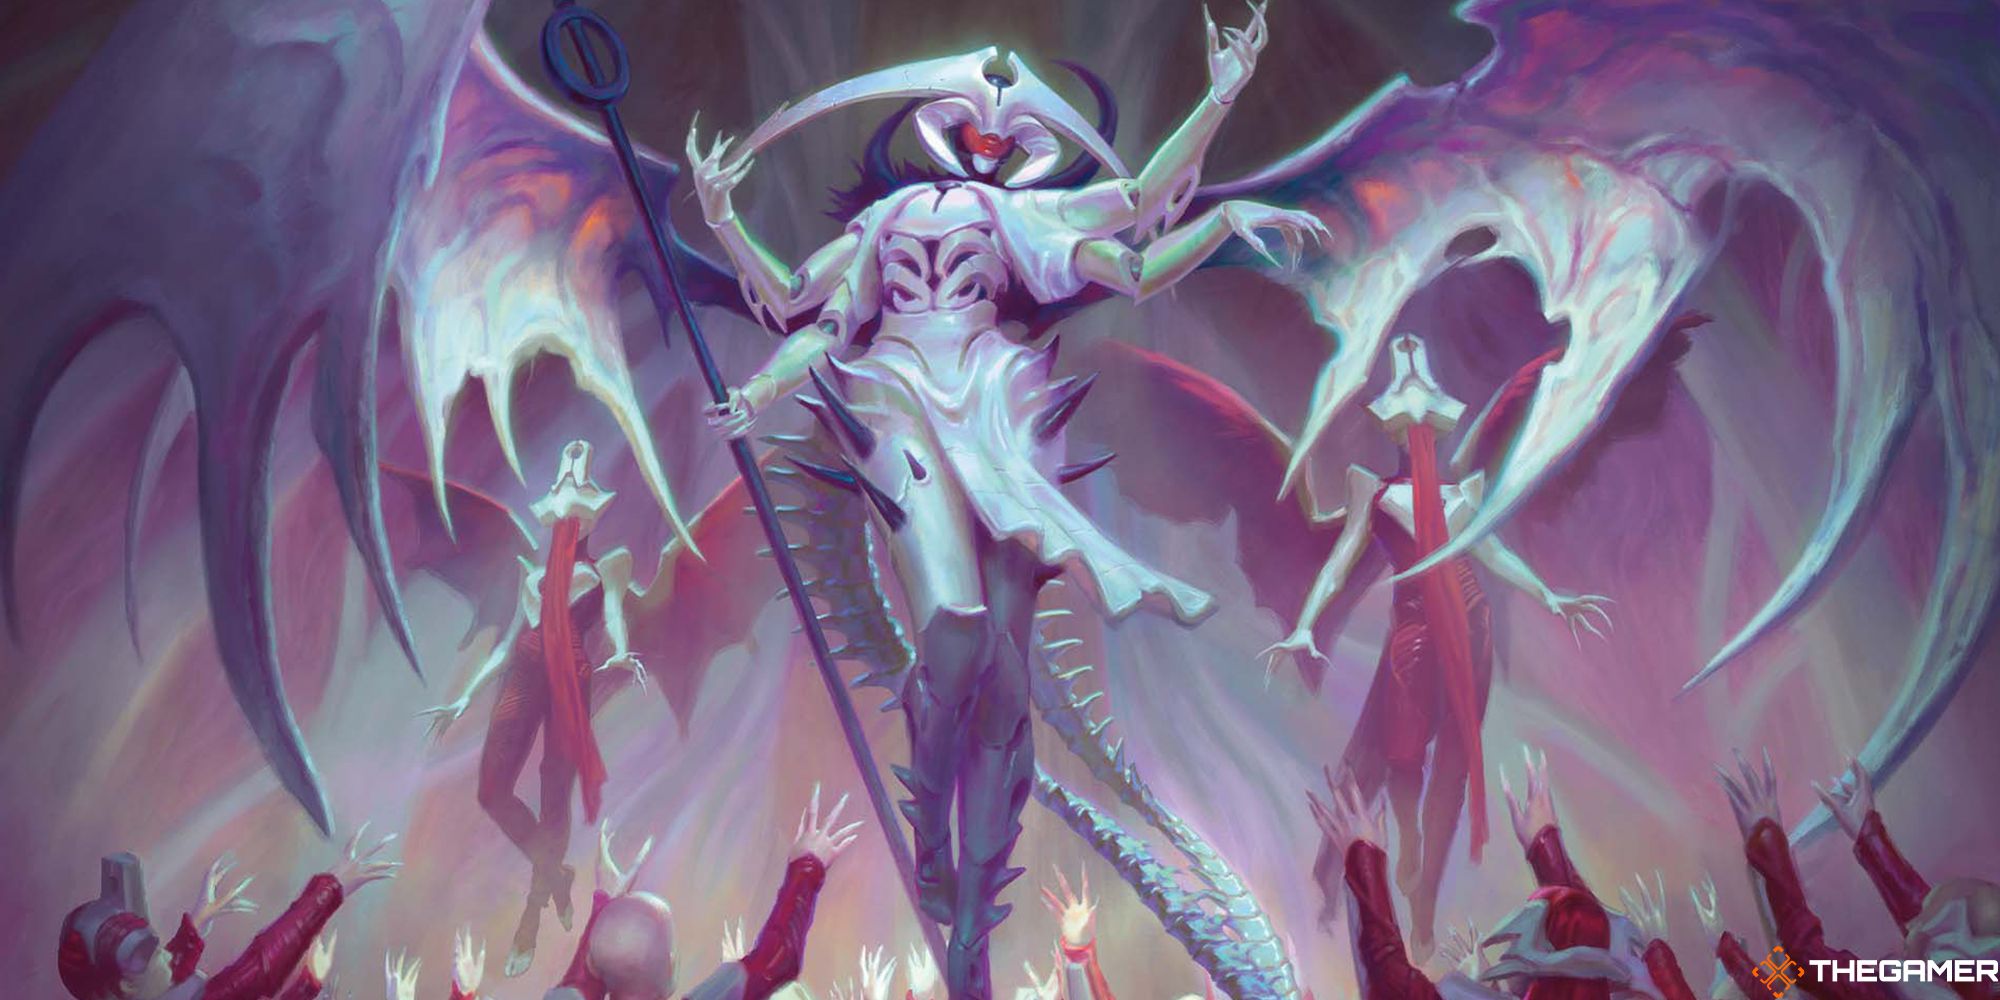 Atraxa, a compleated Phyrexian Angel flying above adoring crowds of Phyrexians.